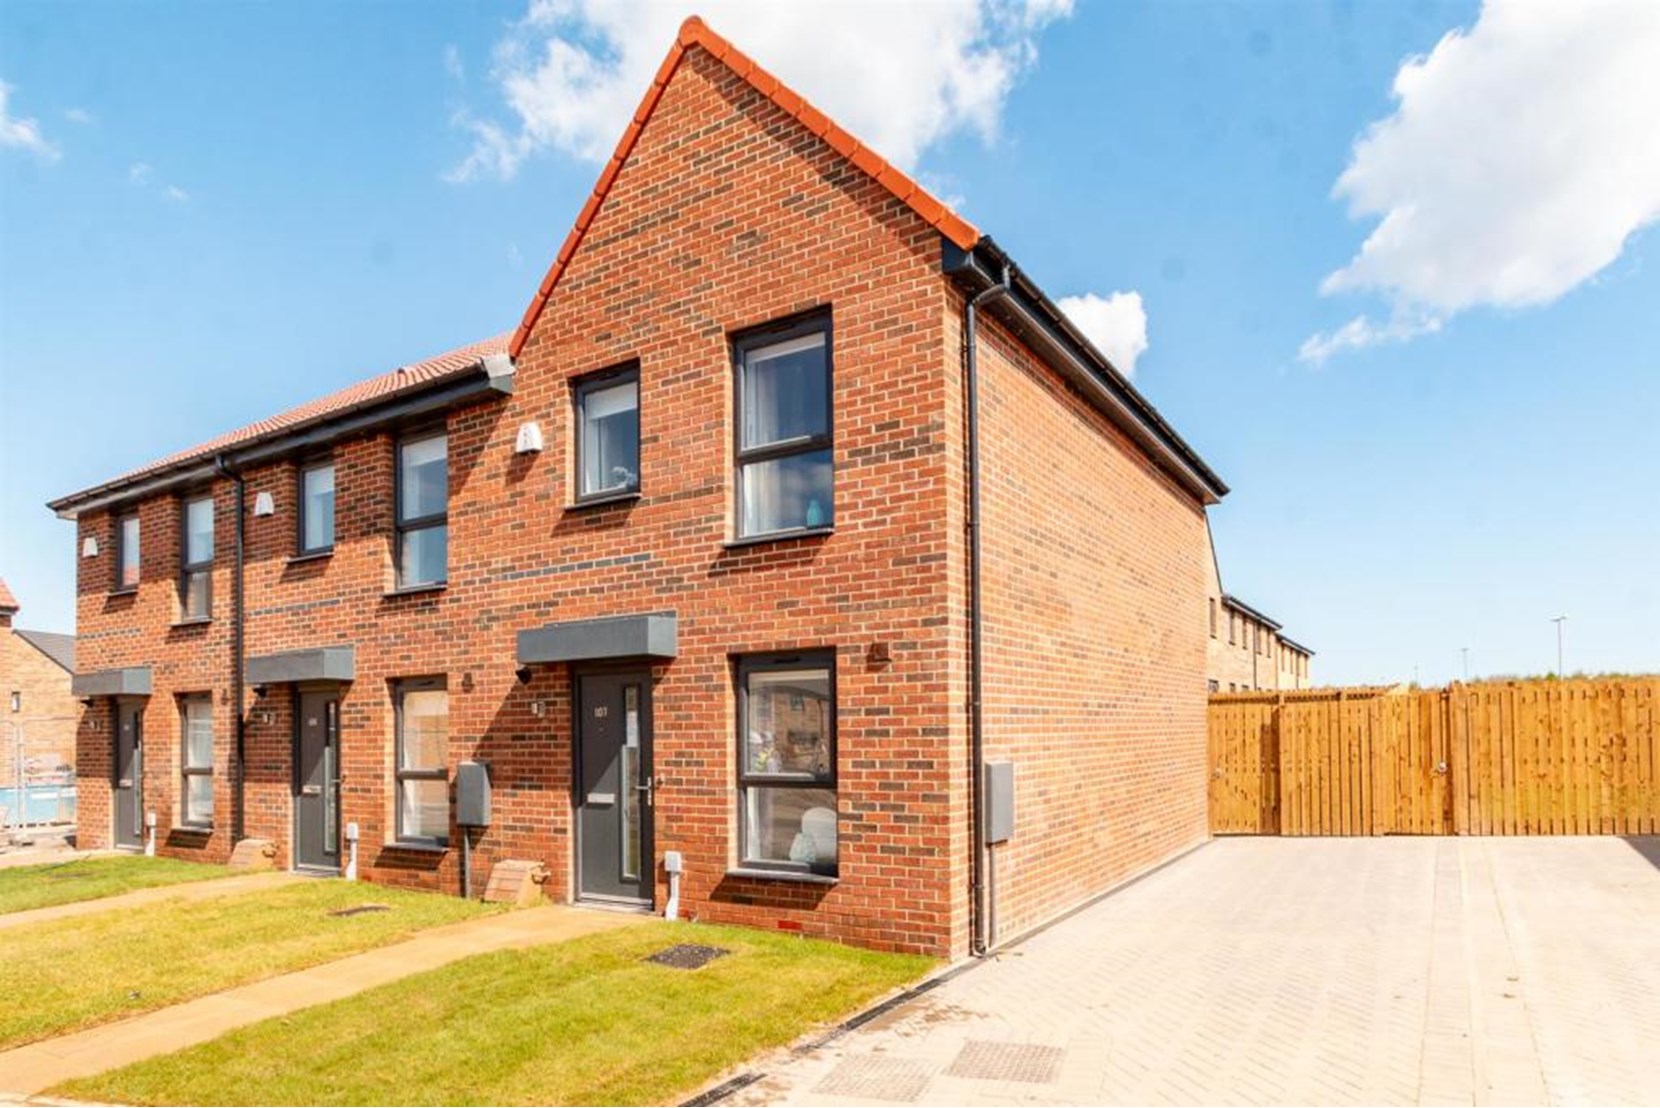 Houses to Rent by Simple Life at Kirkleatham Green, Redcar, TS10, development panoramic